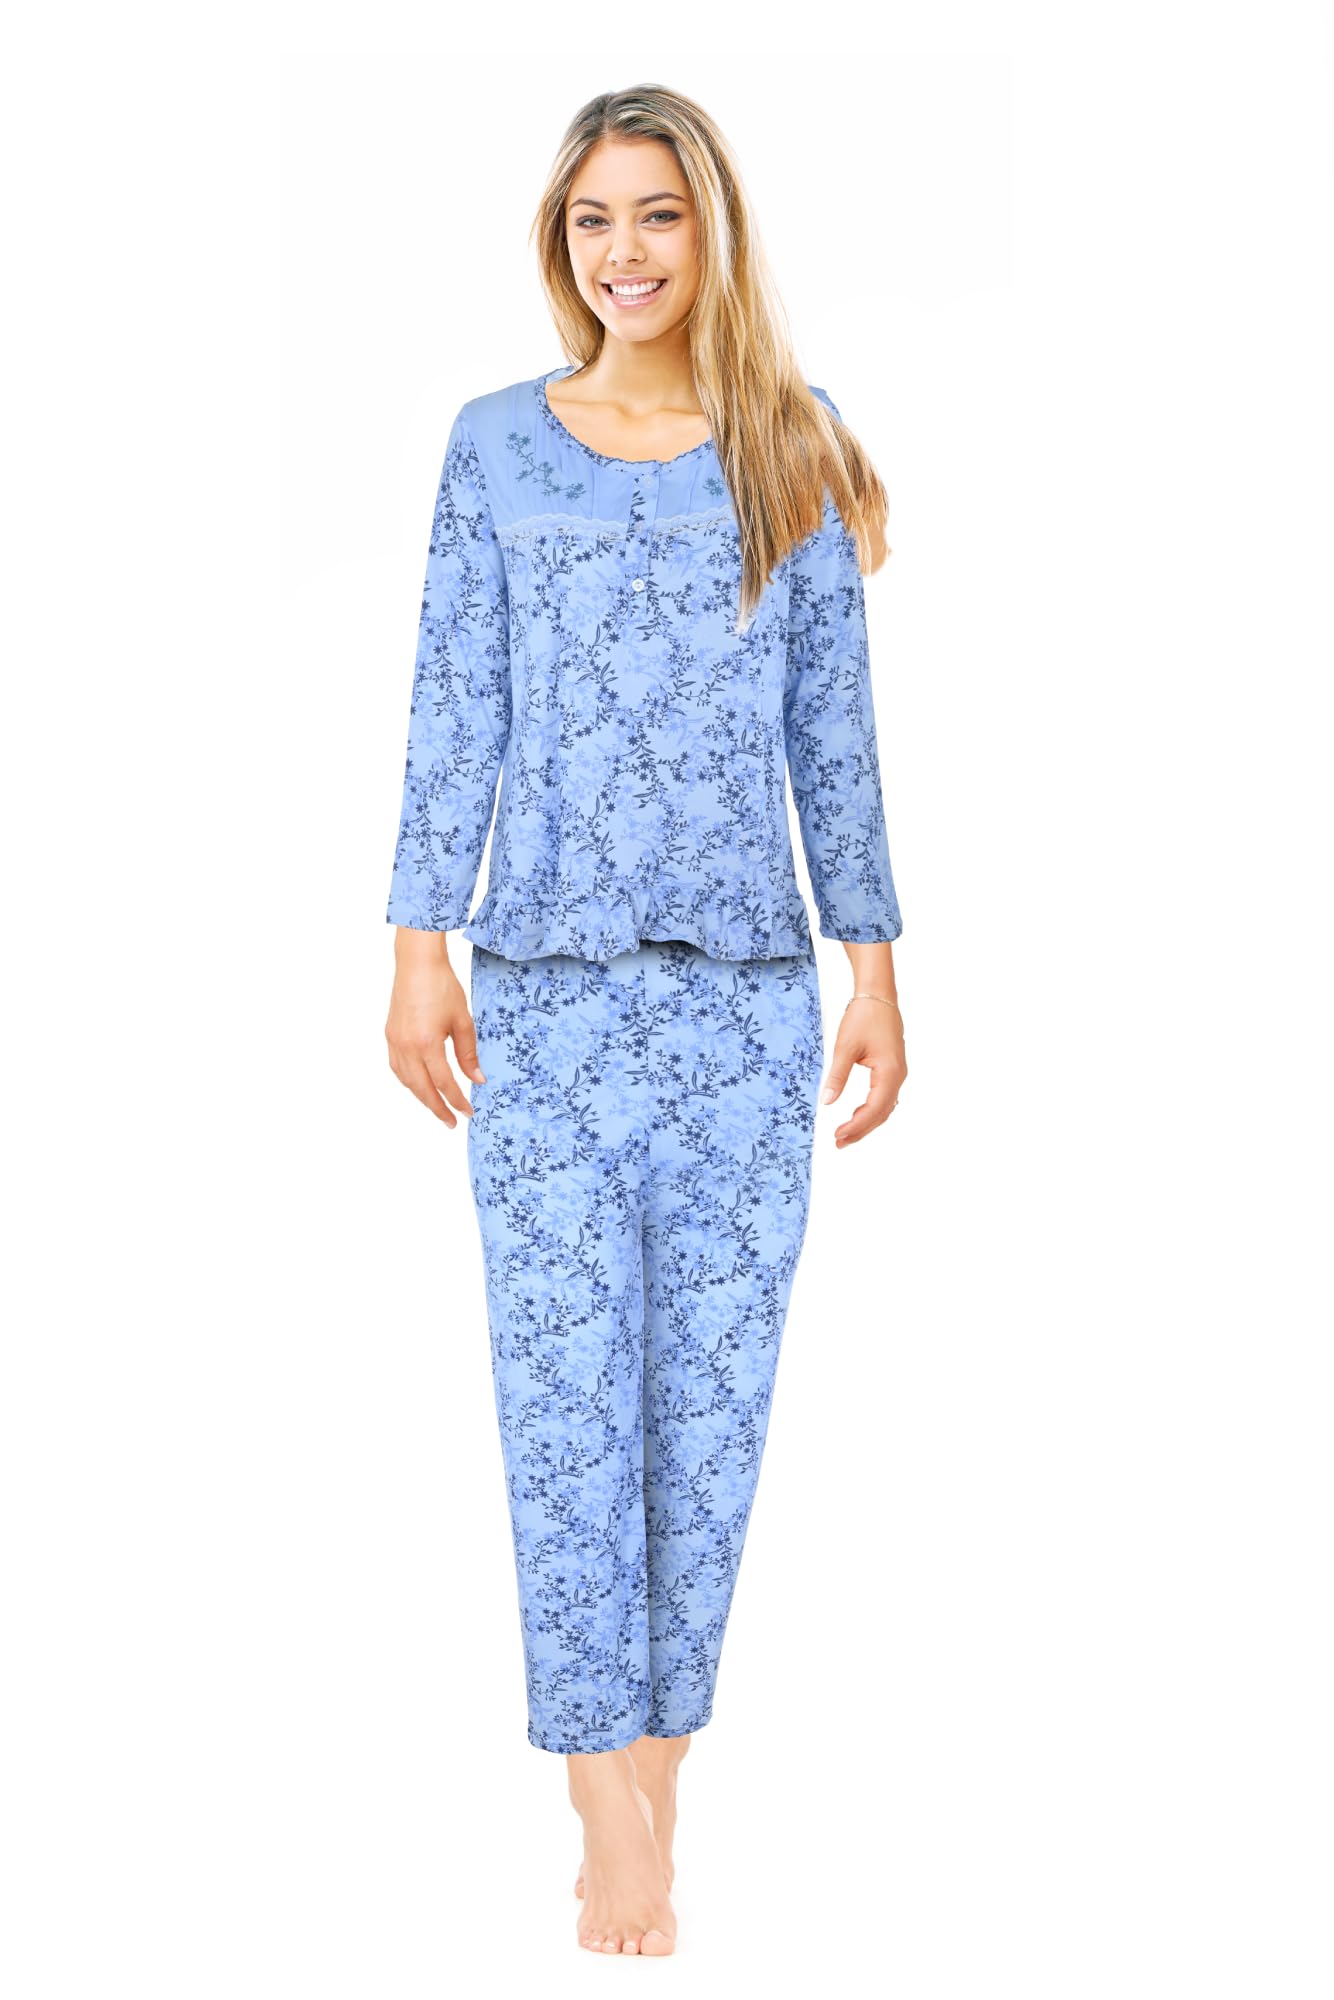 ZECOTEX Double Cashmere Pajamas for Women, 100% Cotton, Full Sleeves  Zipper Jacket + Head Cover Pajamas, Comfortable Home Wear for Winter